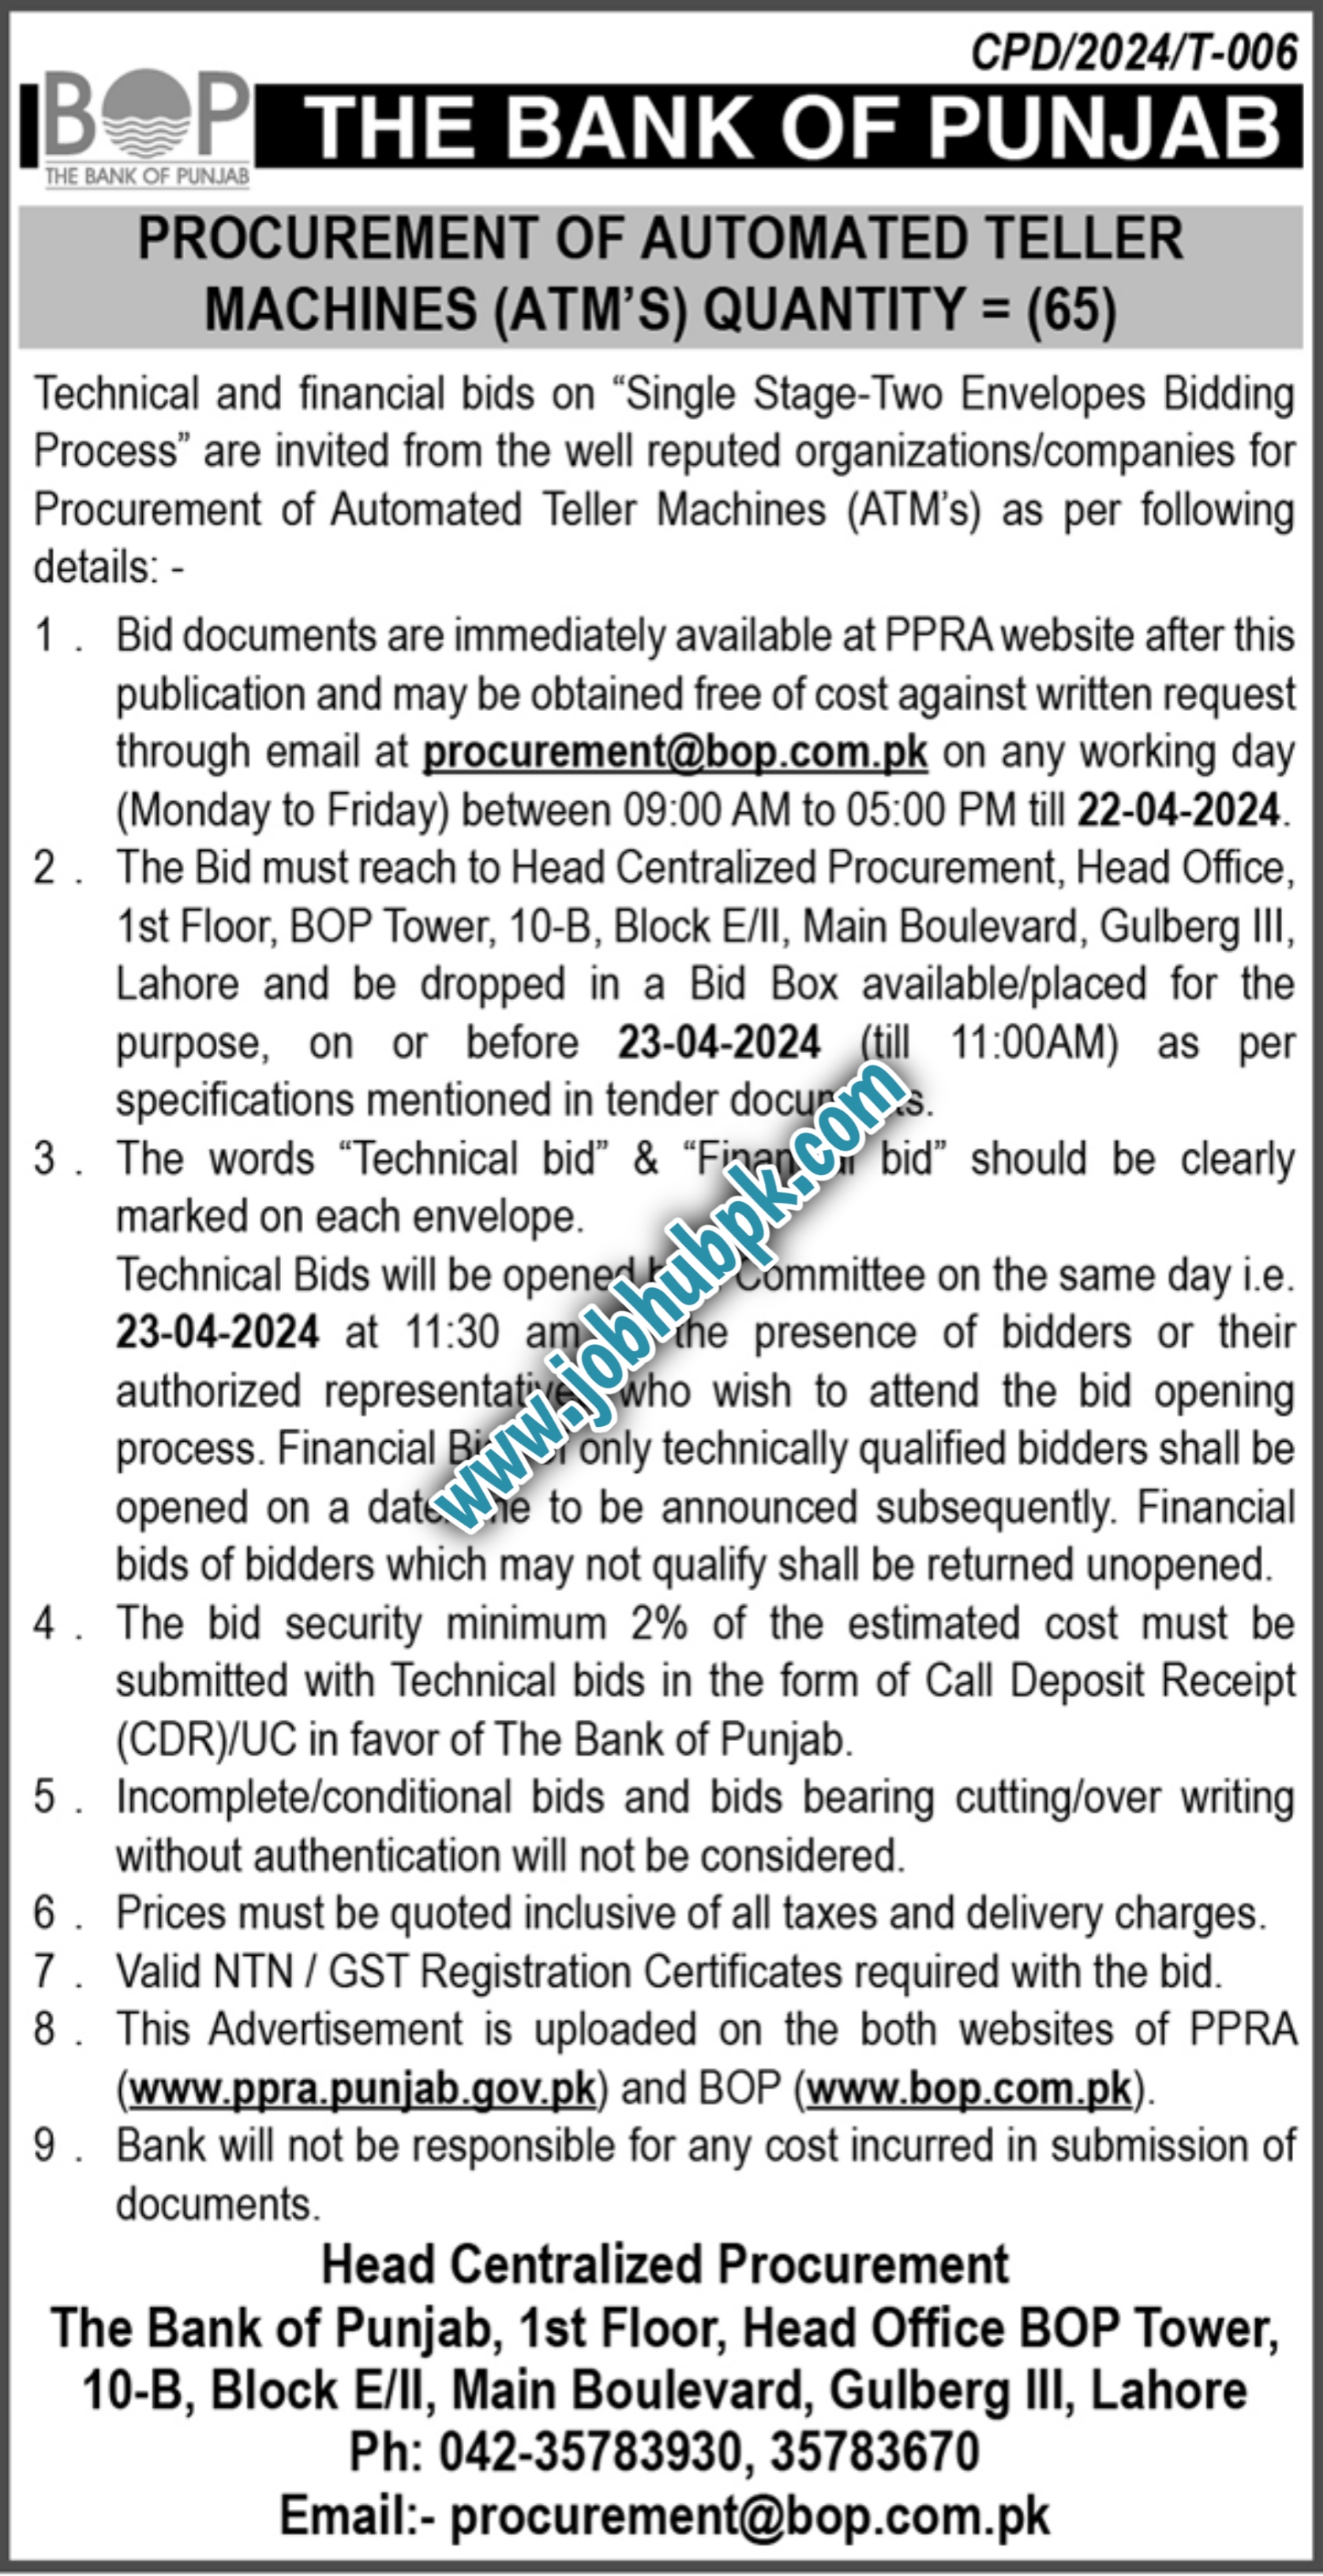  The Bank of Punjab's procurement of Automated Teller Machines